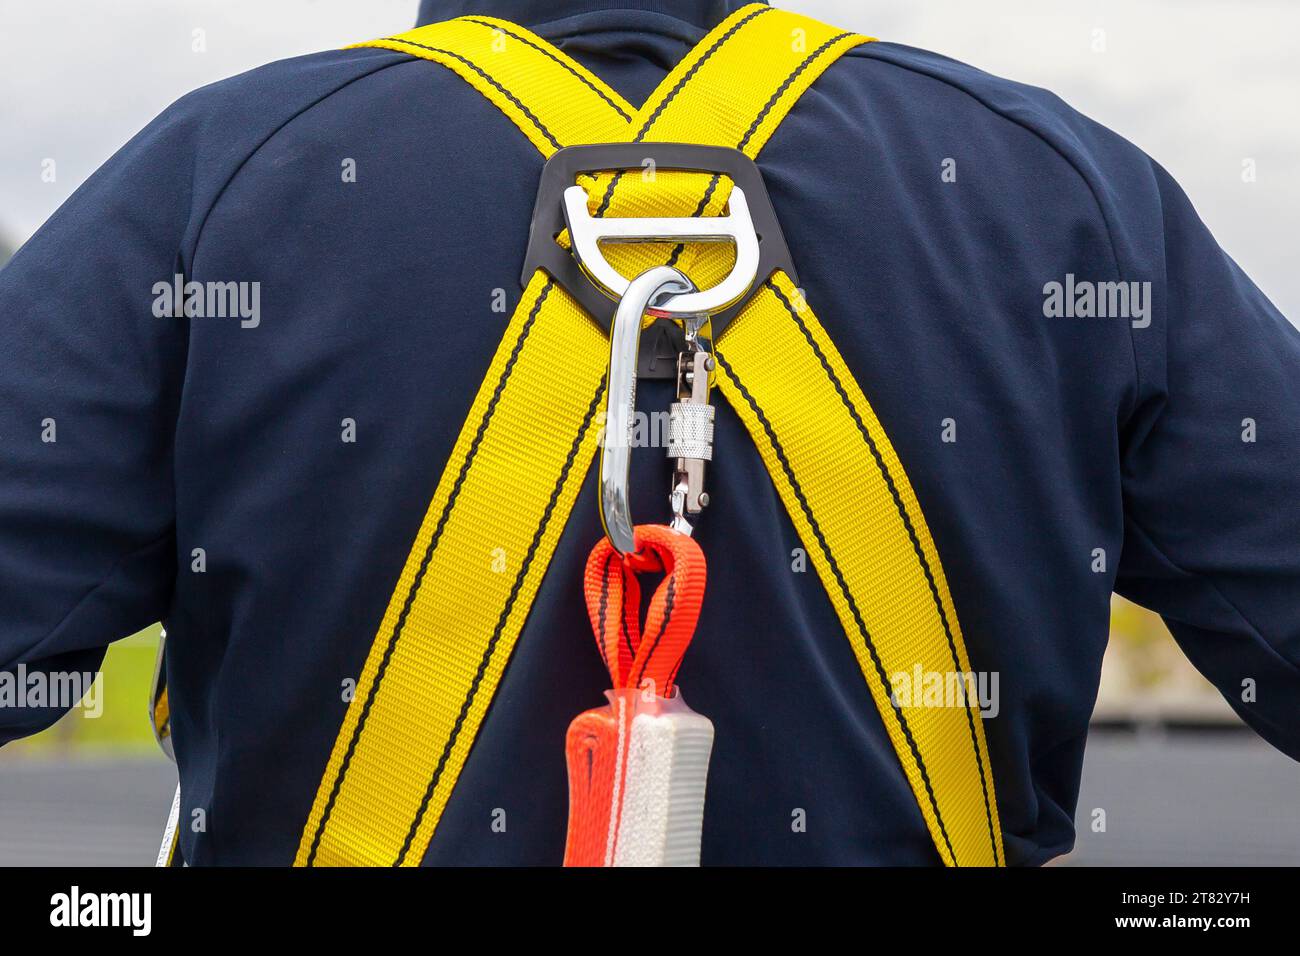 Safety clothing for working on a technician's building Stock Photo